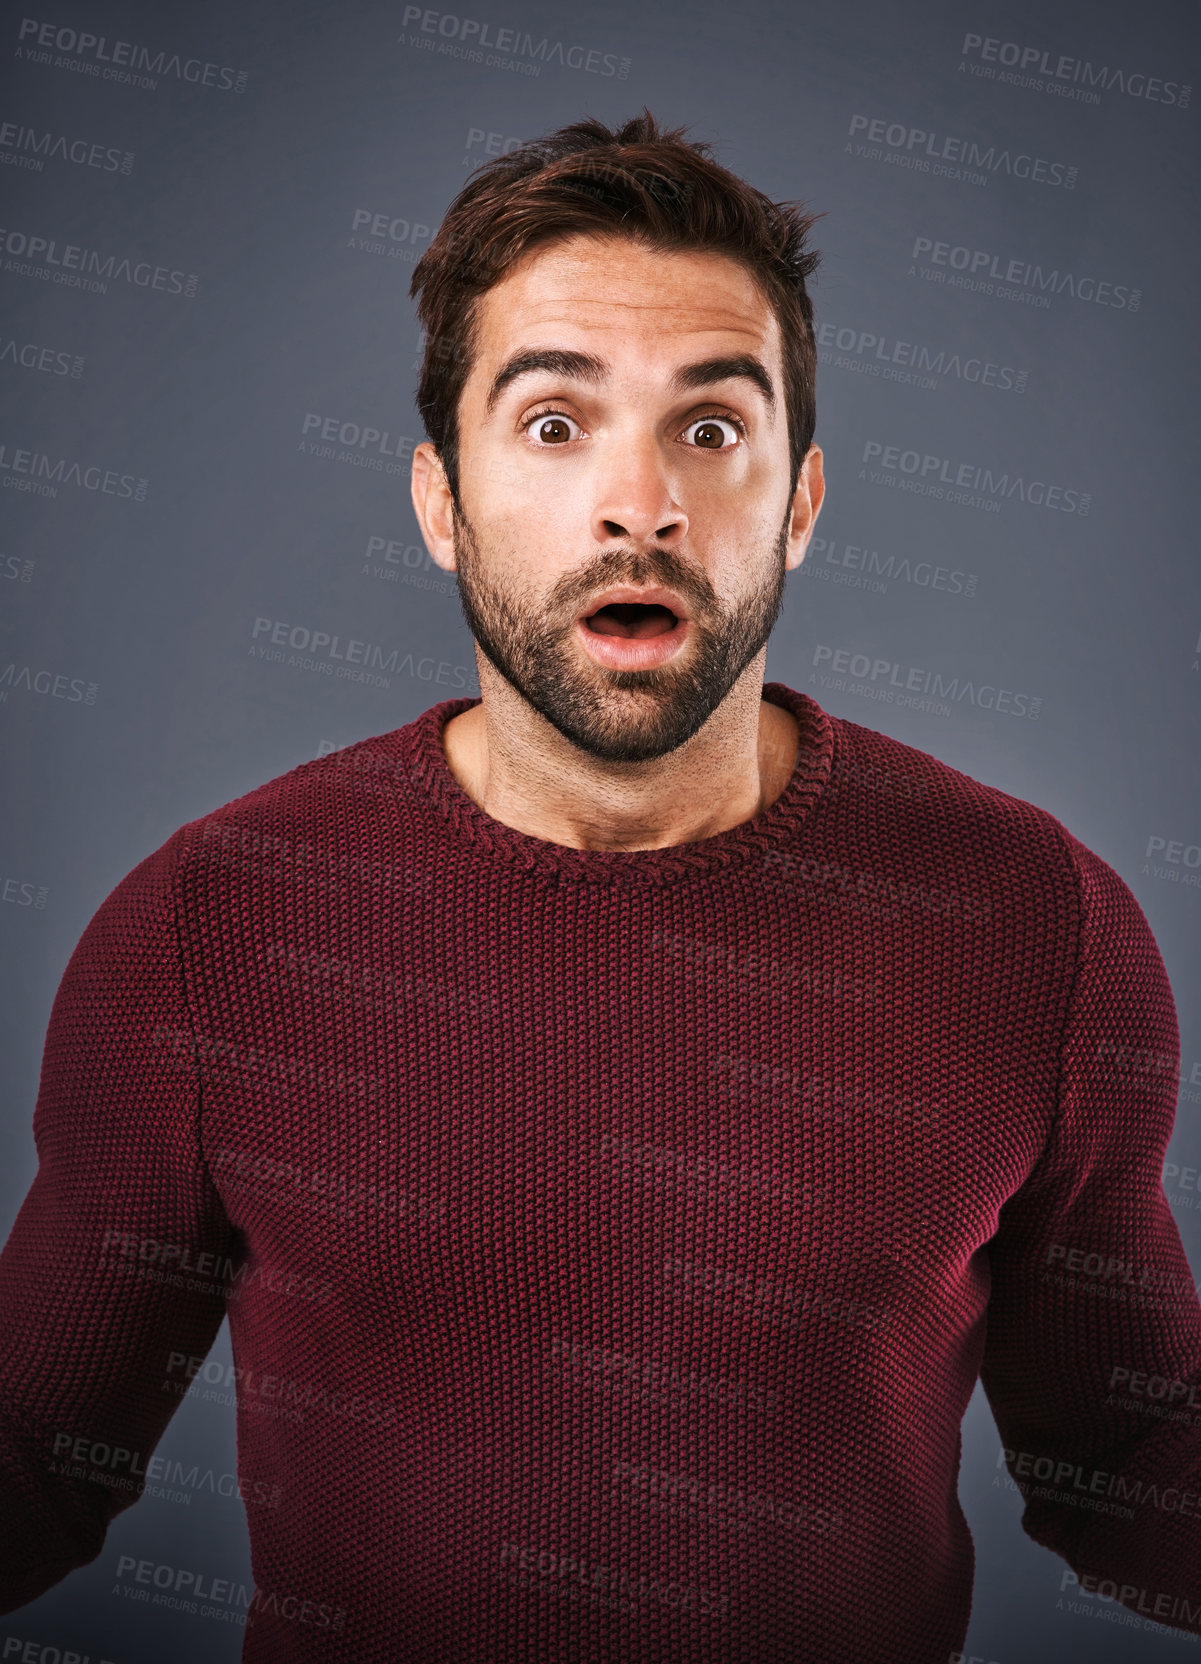 Buy stock photo Studio shot of a handsome young man looking surprised against a gray background